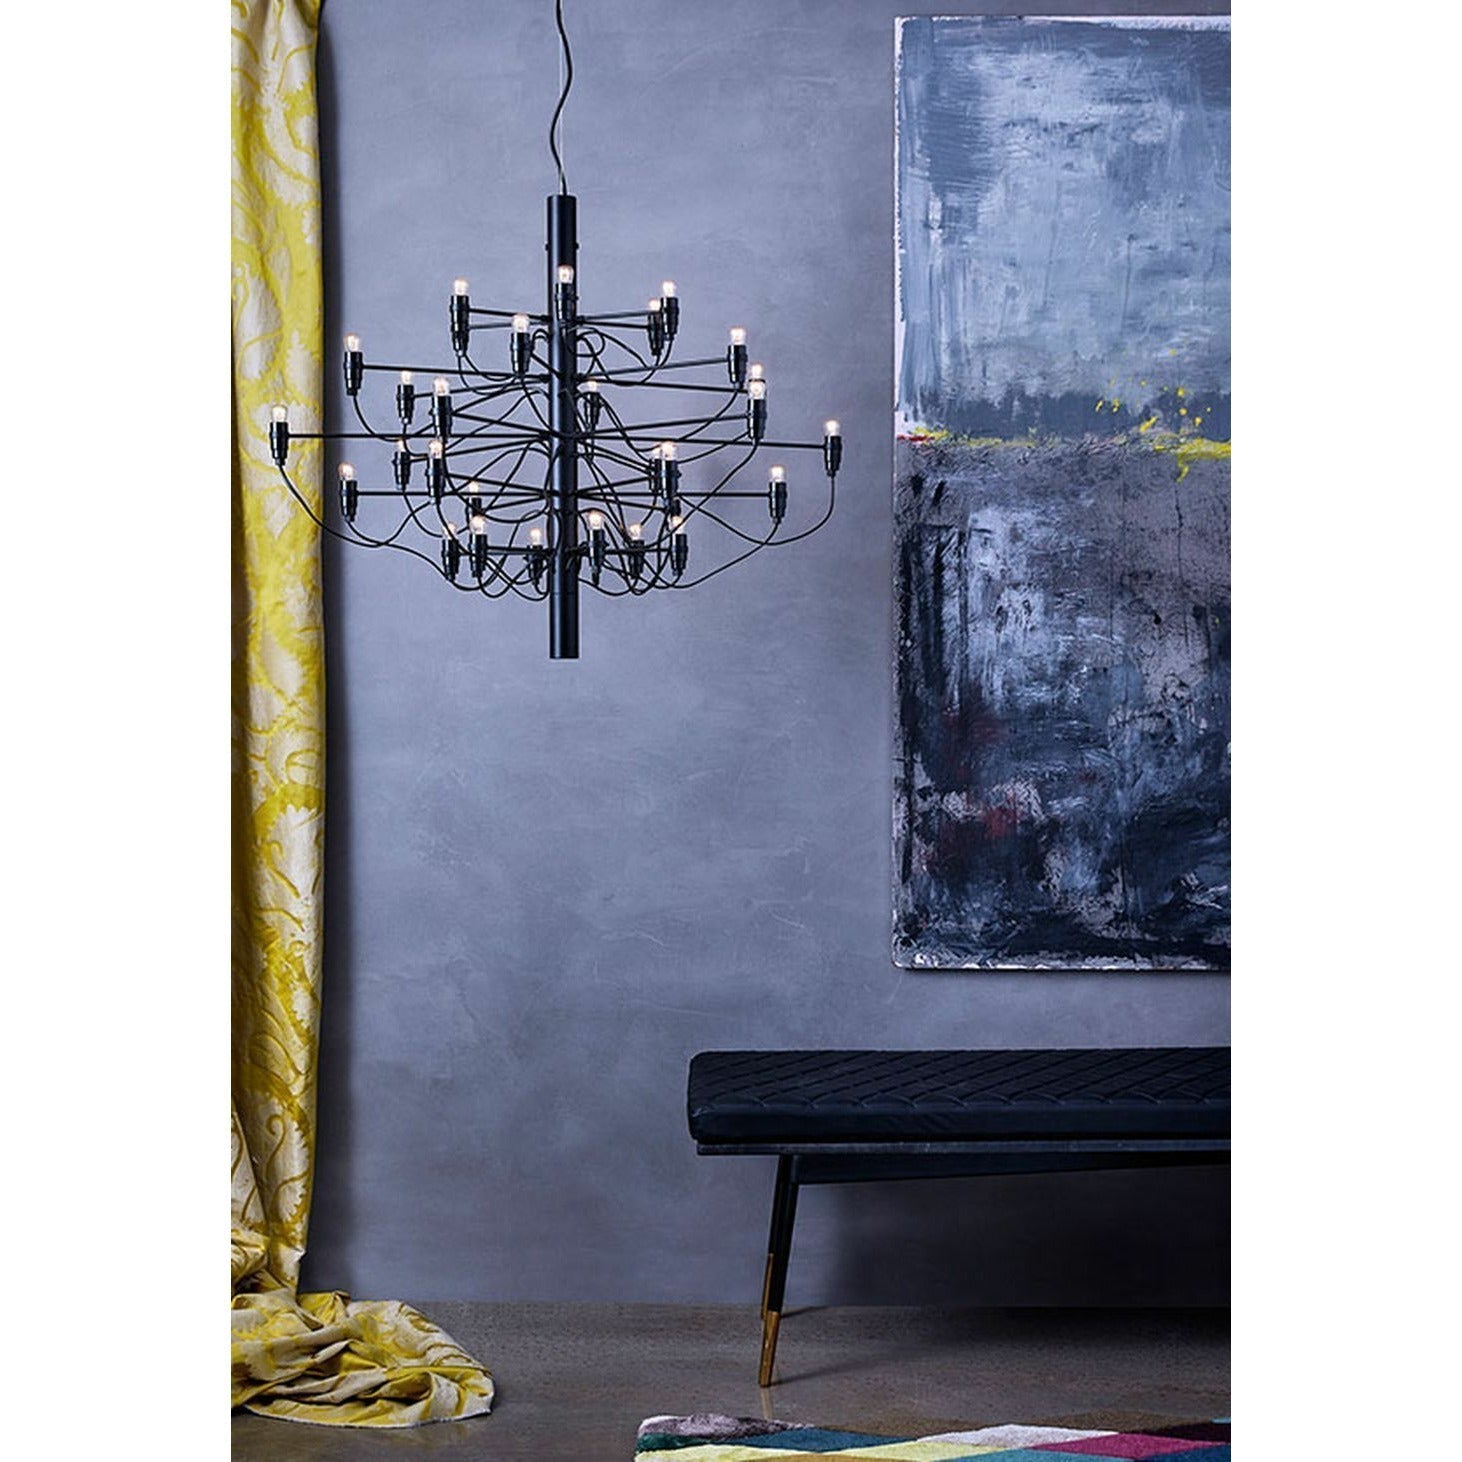 Flos 2097/50 Frosted Chandelier, Brass